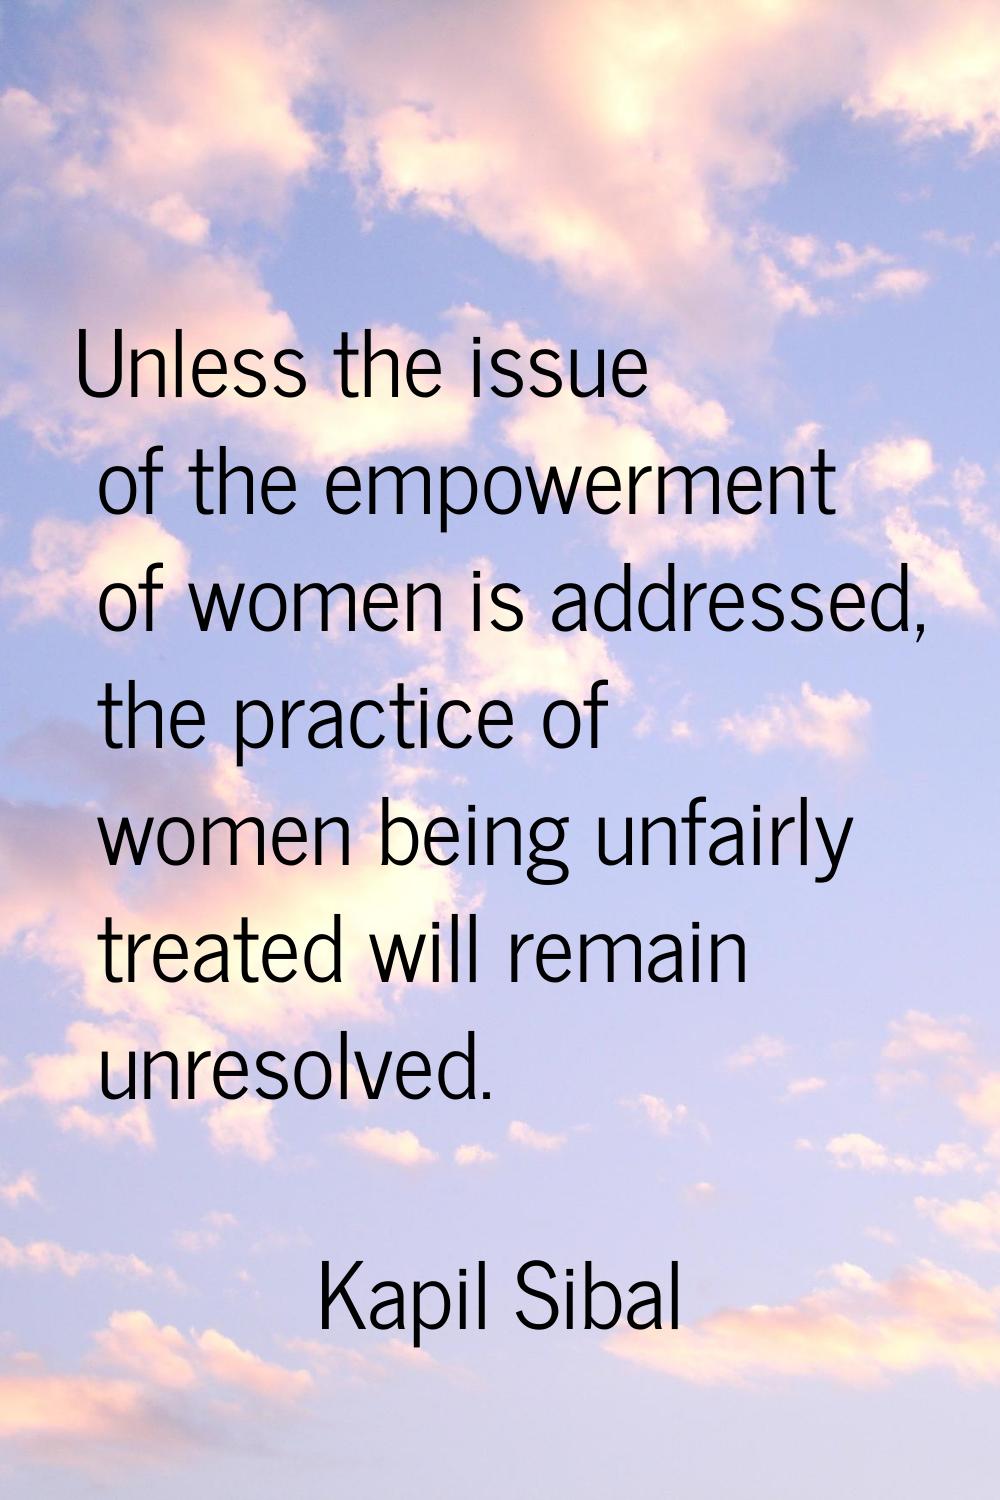 Unless the issue of the empowerment of women is addressed, the practice of women being unfairly tre